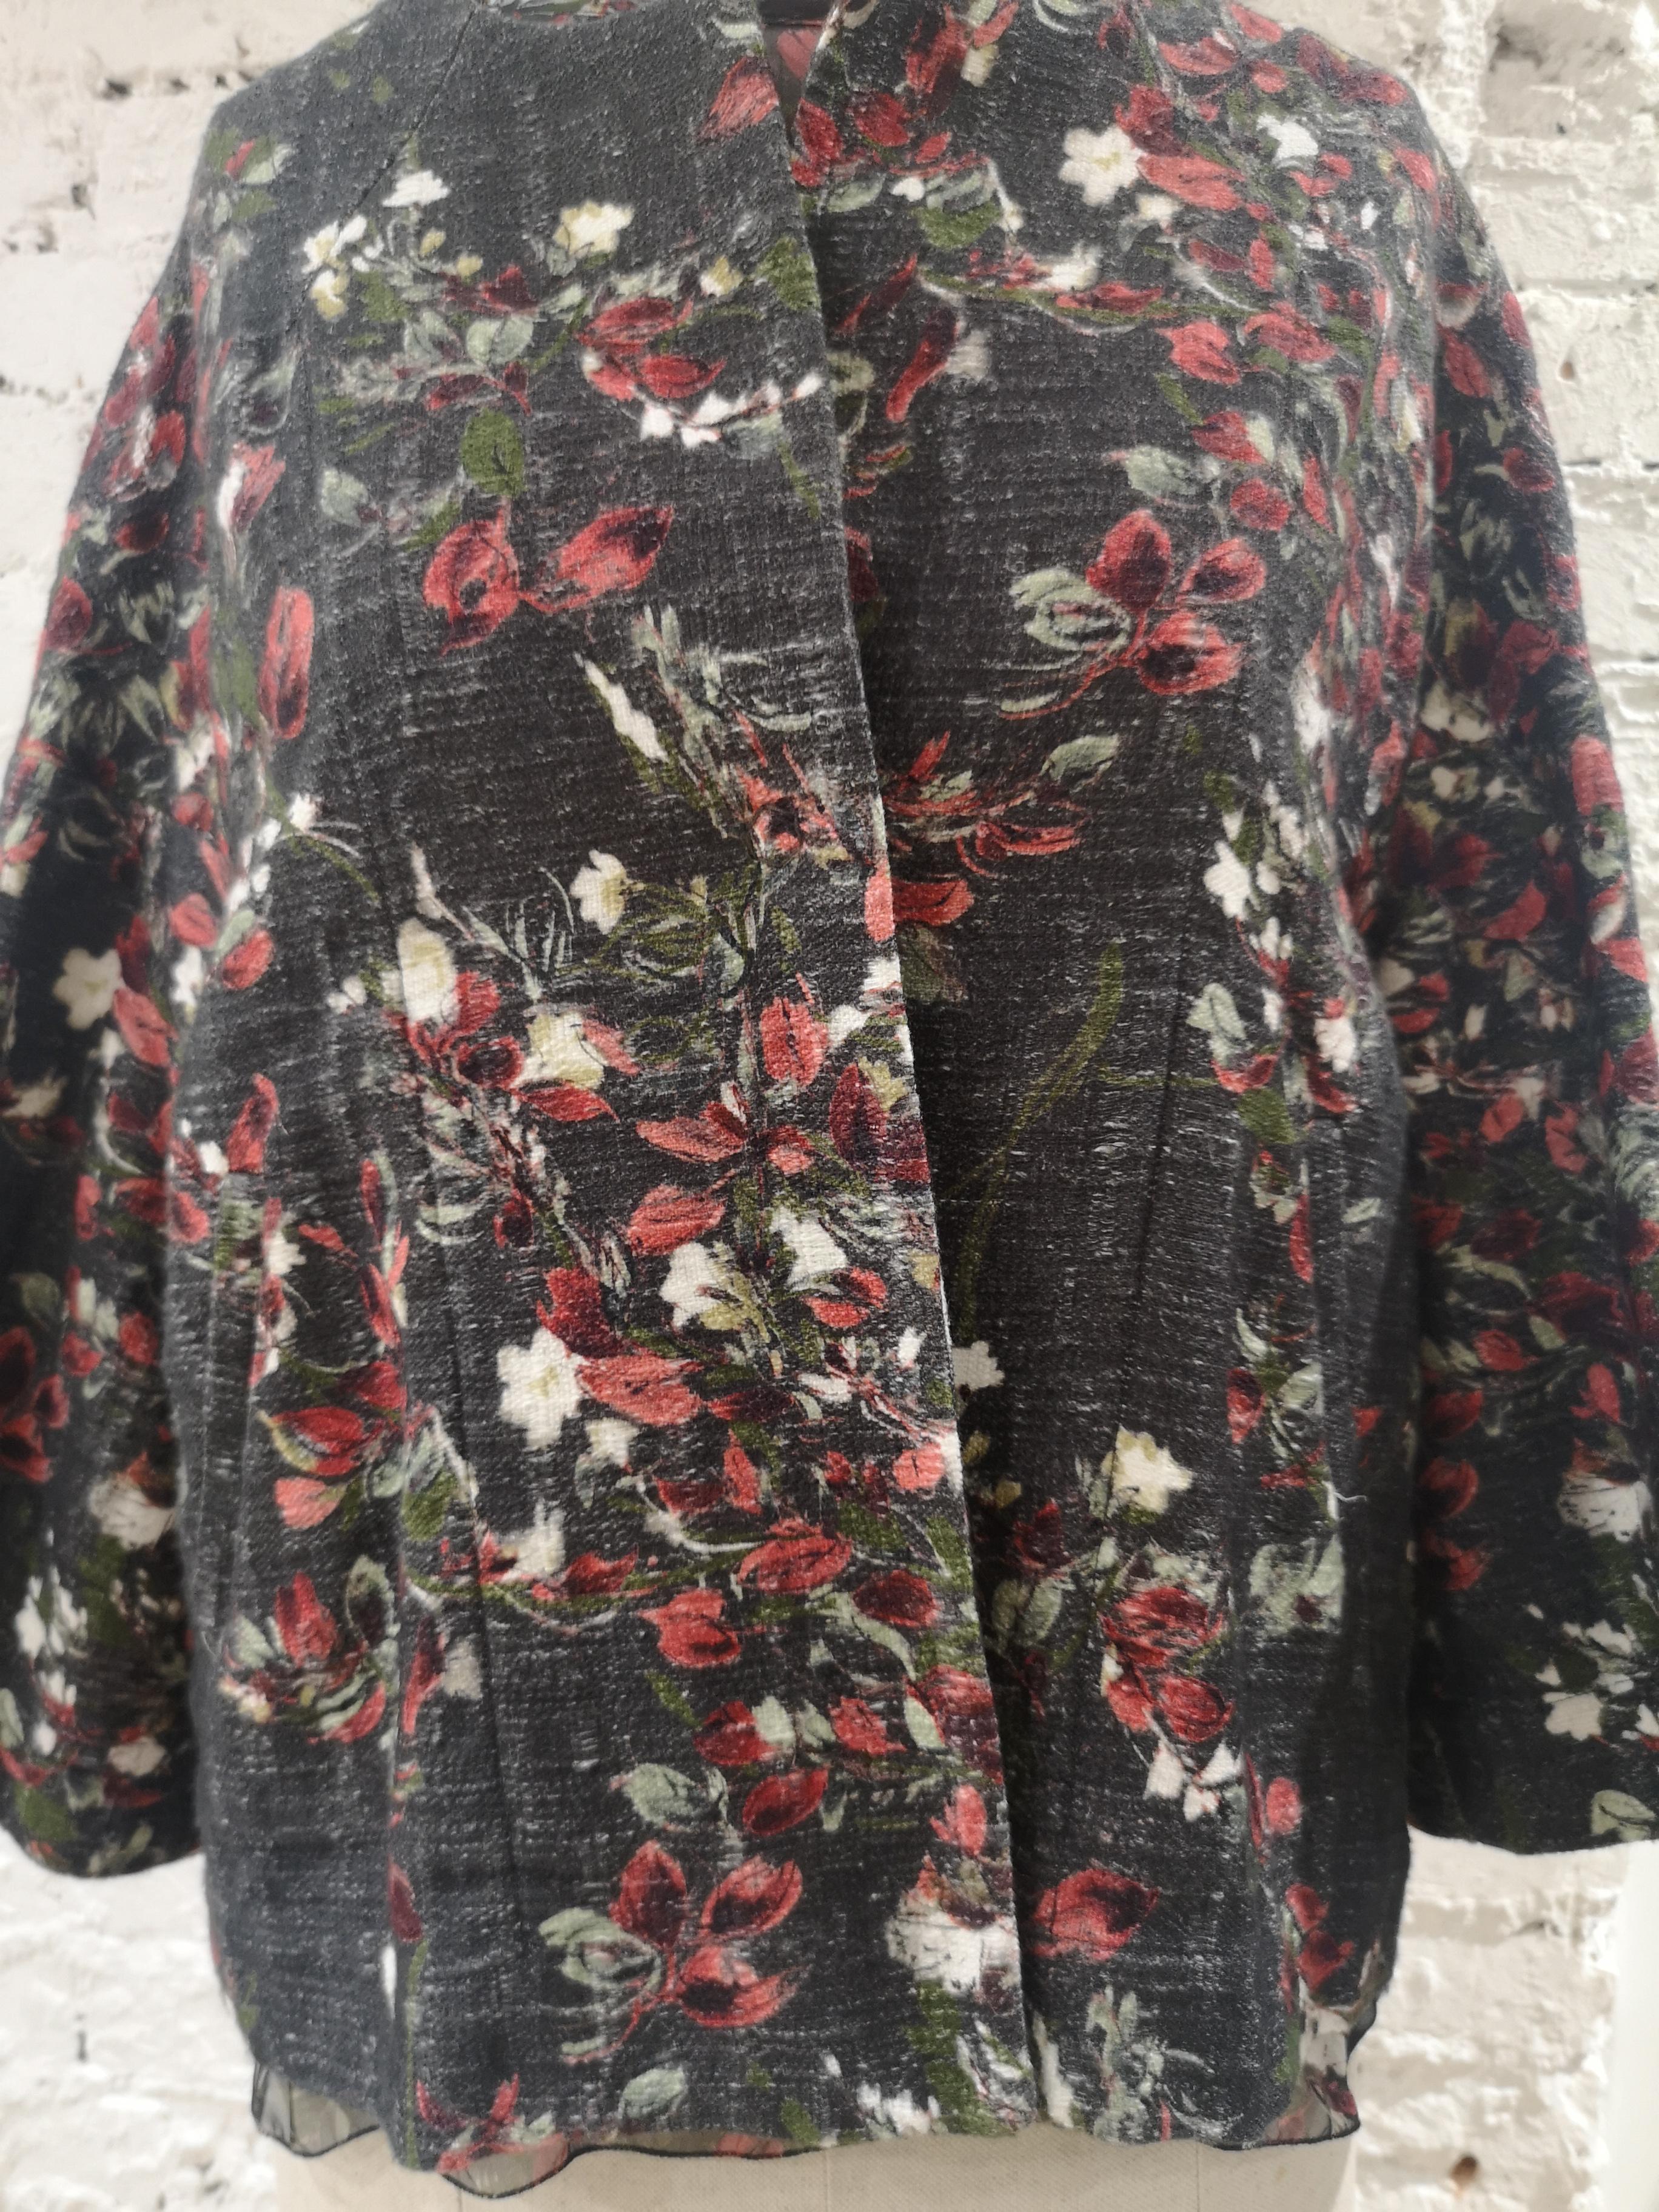 Vintage jacket blouse twin-set
grey with flowers totally made in italy twin set 
composition: cotton and linen
size M